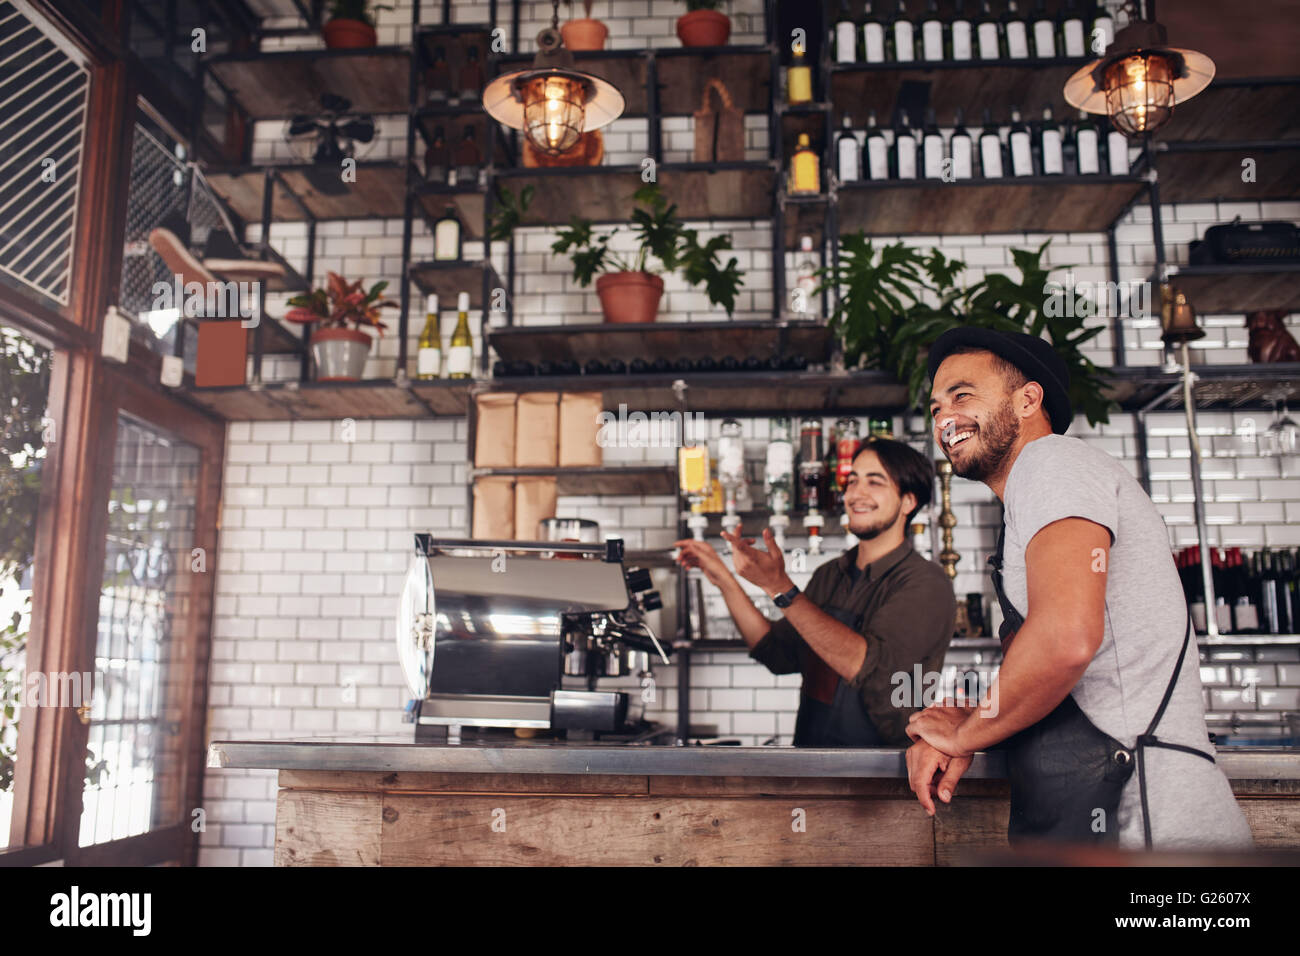 Coffee shop workers standing at the counter looking outside the cafe and smiling. Stock Photo